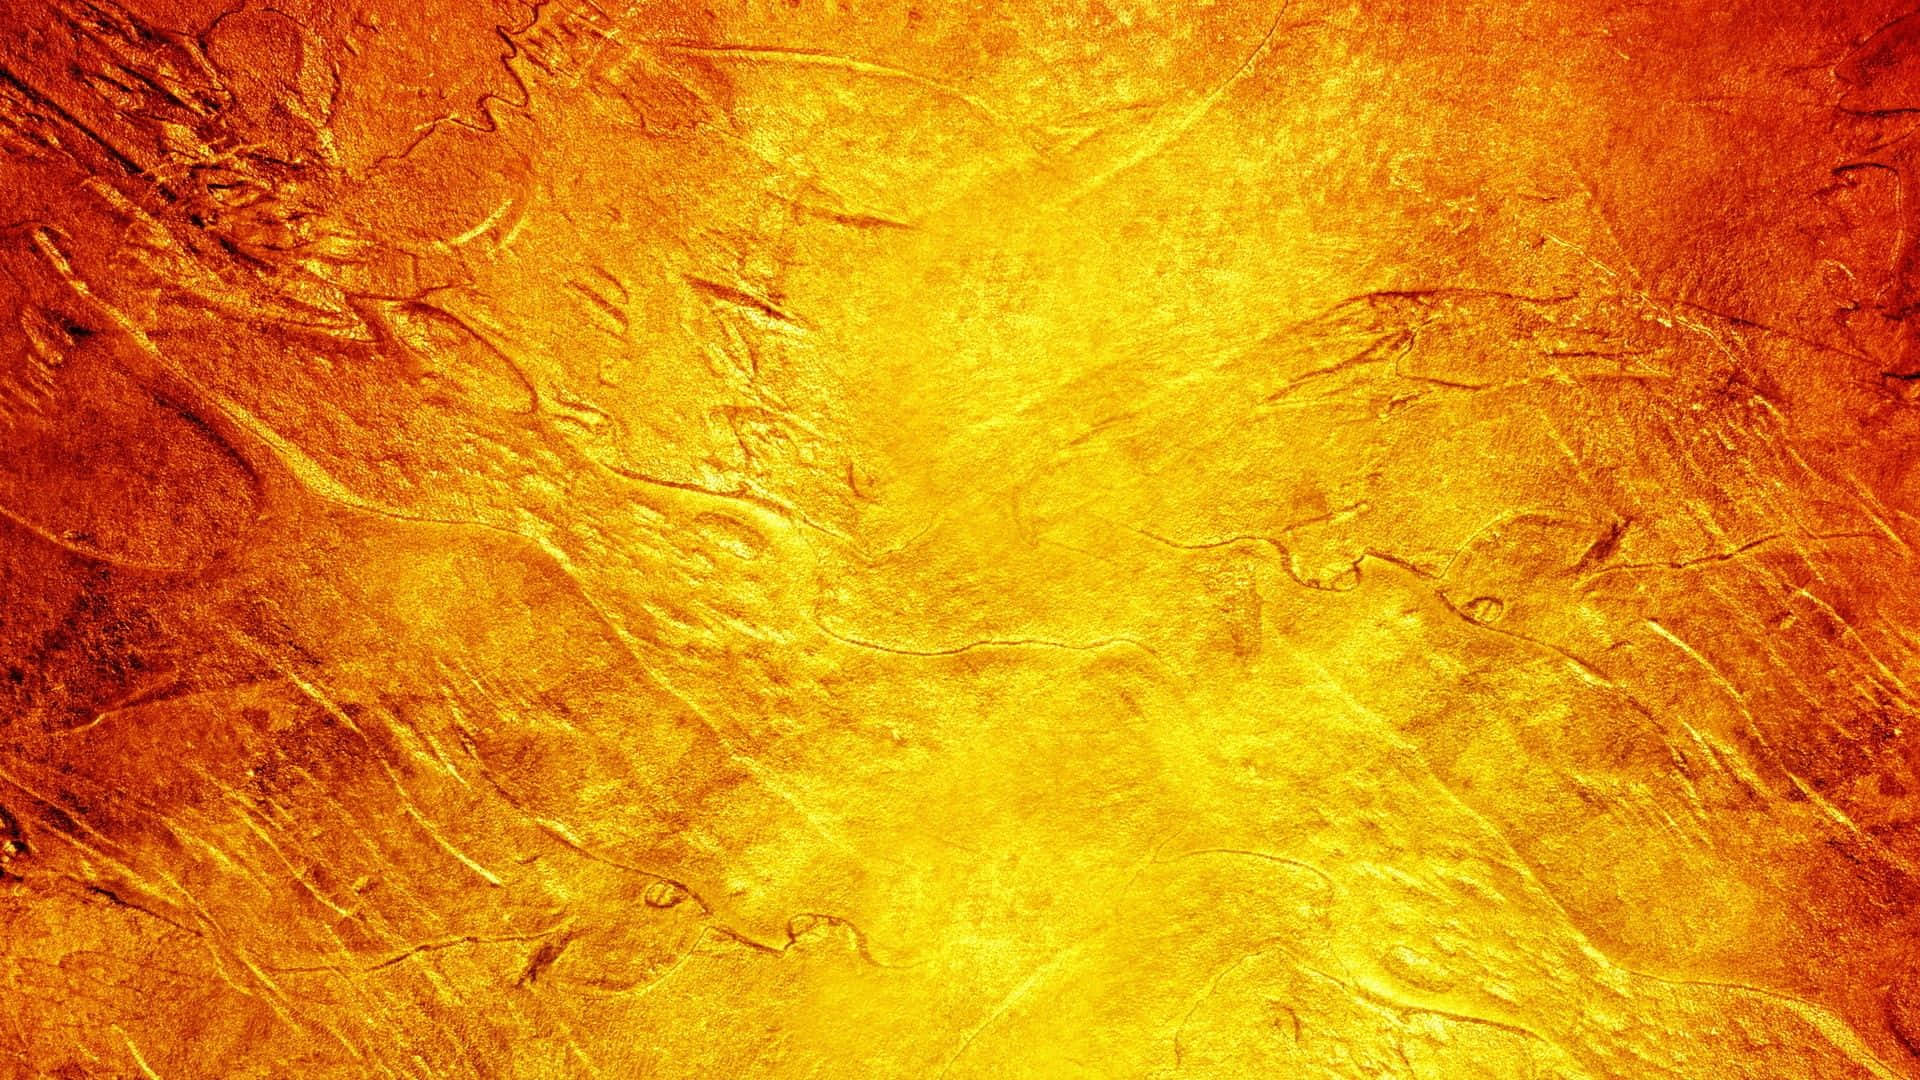 A Yellow And Orange Abstract Background Wallpaper